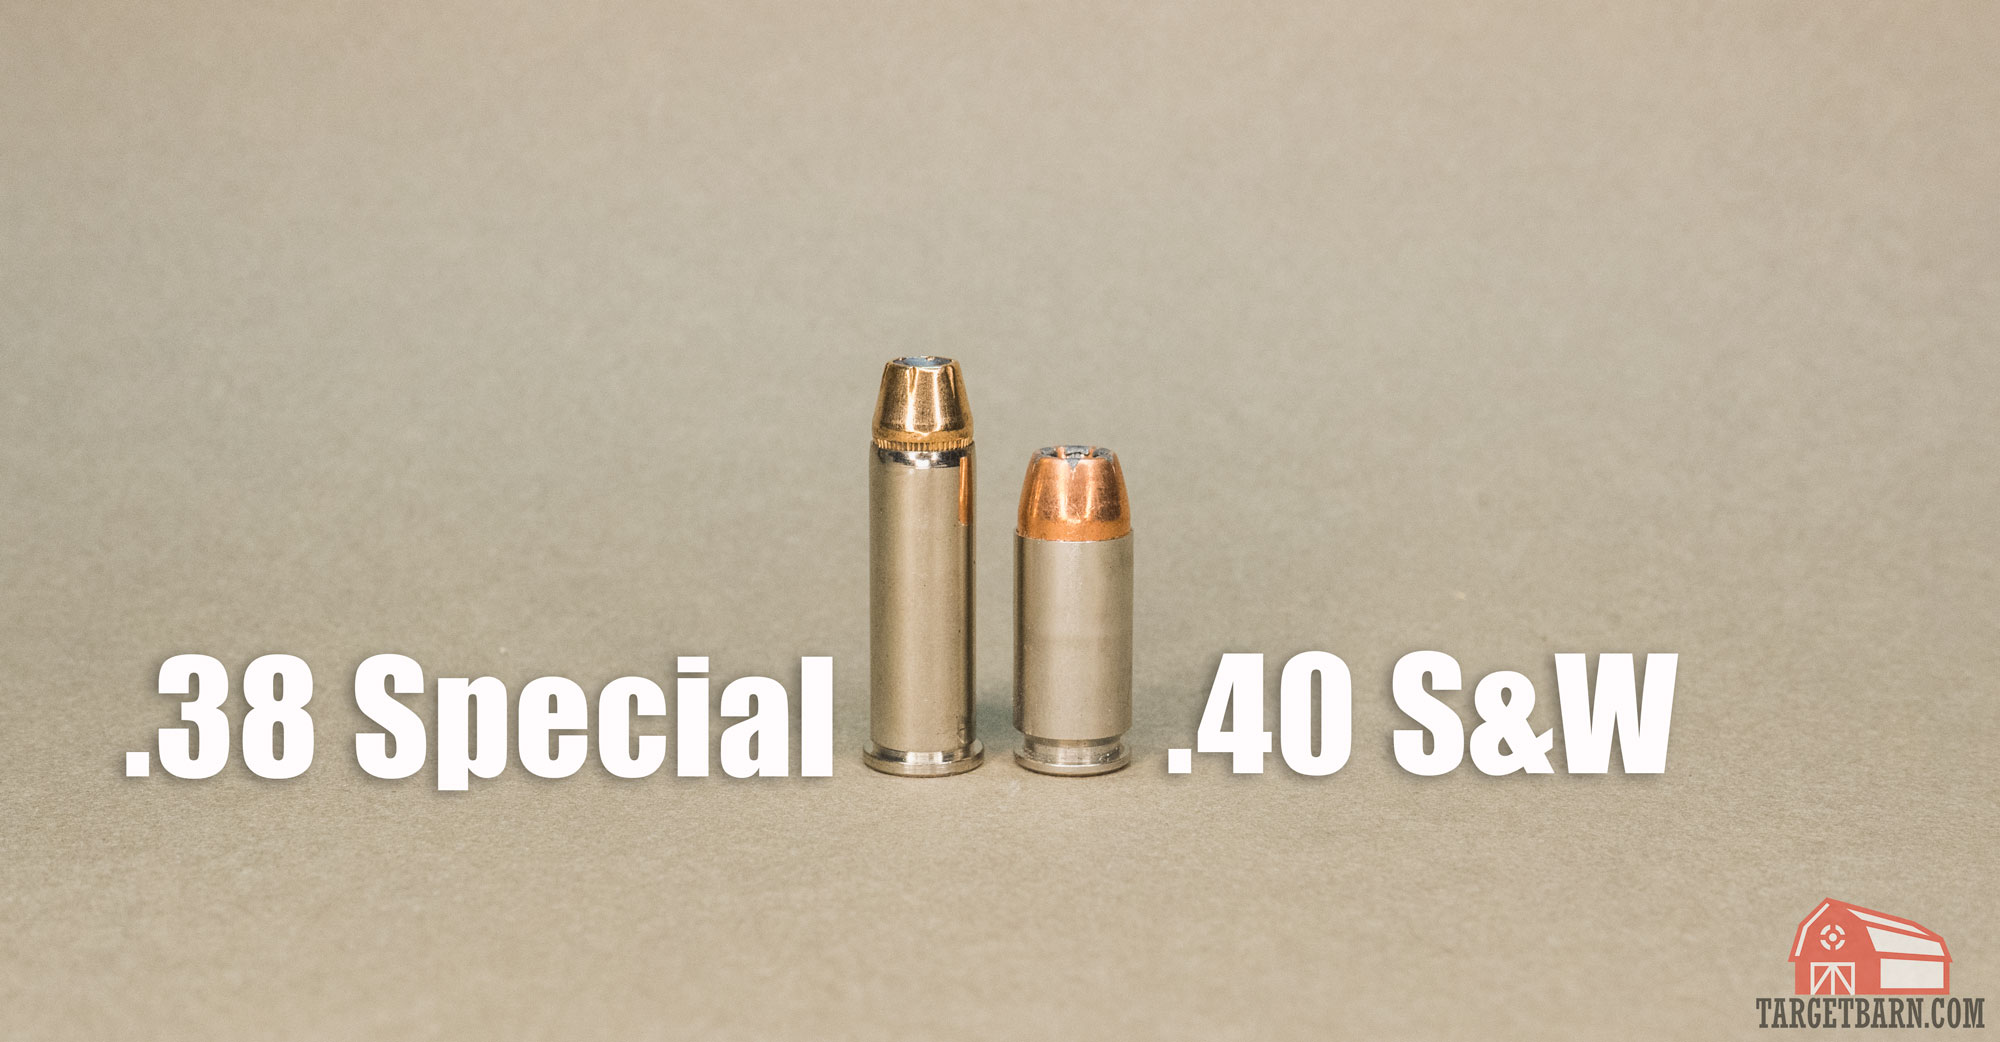 a 38 special round next to a 40 s&w round labeled